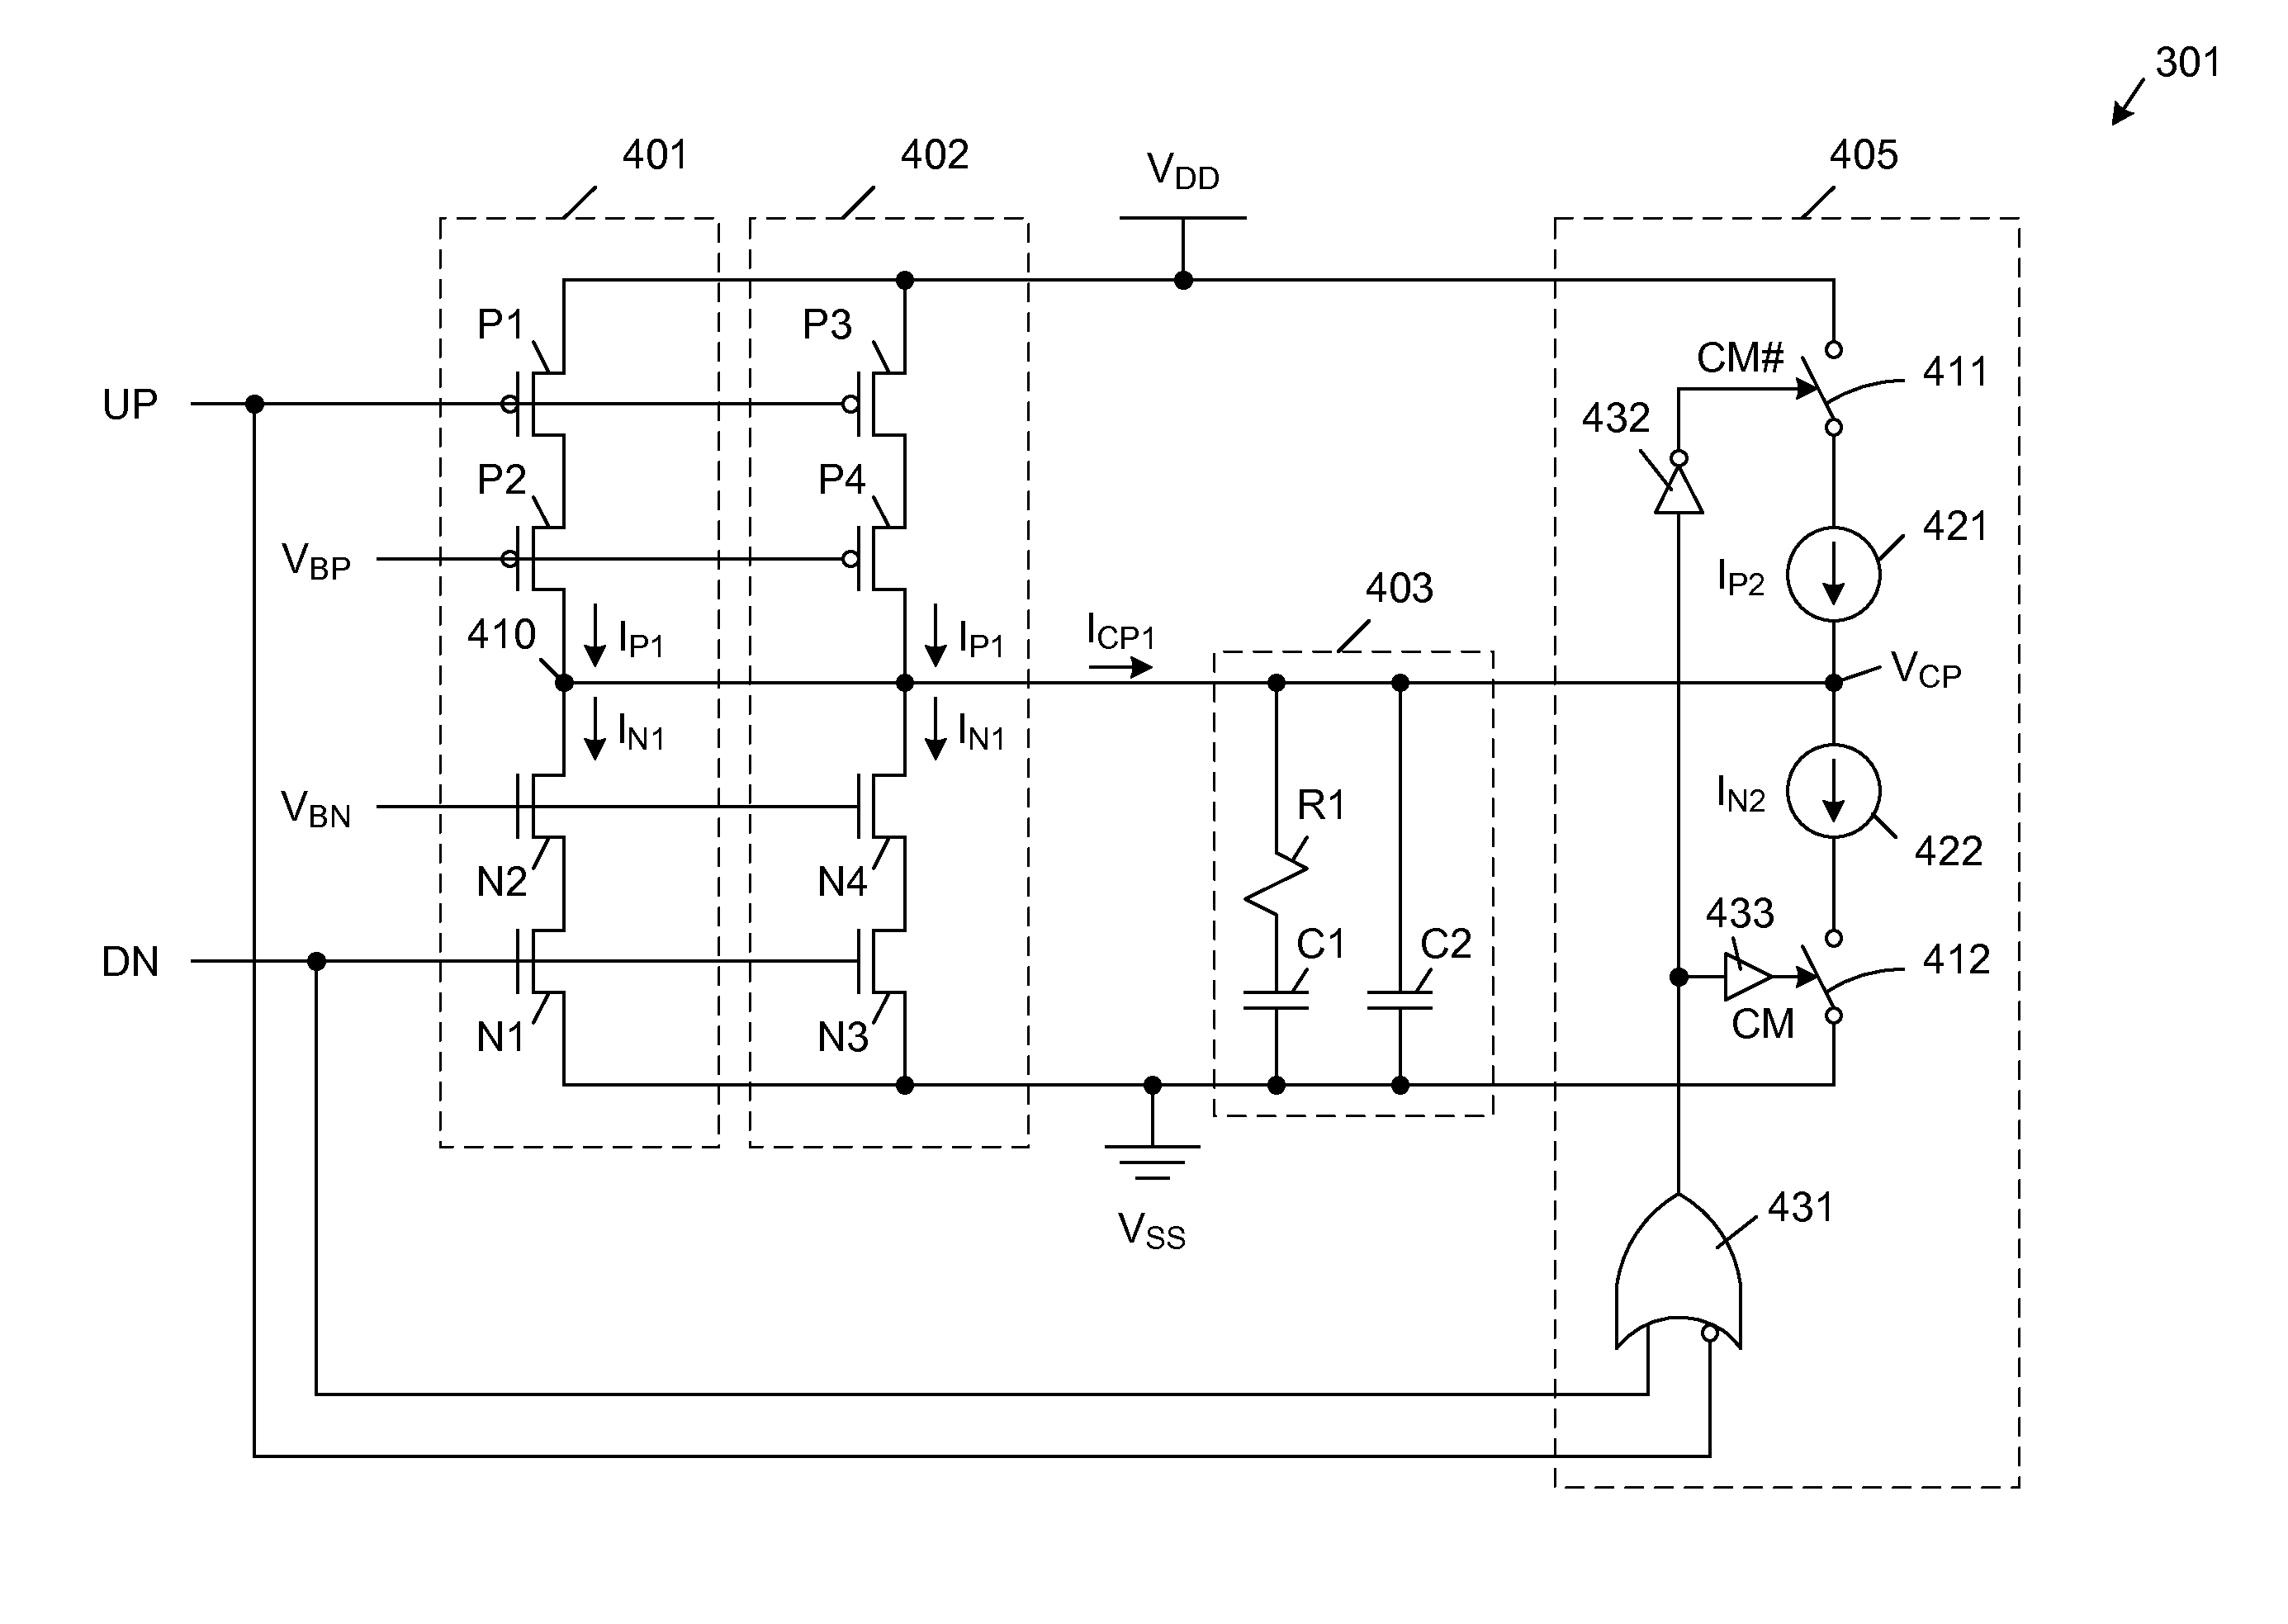 Charge pump linearization technique for delta-sigma fractional-N synthesizers